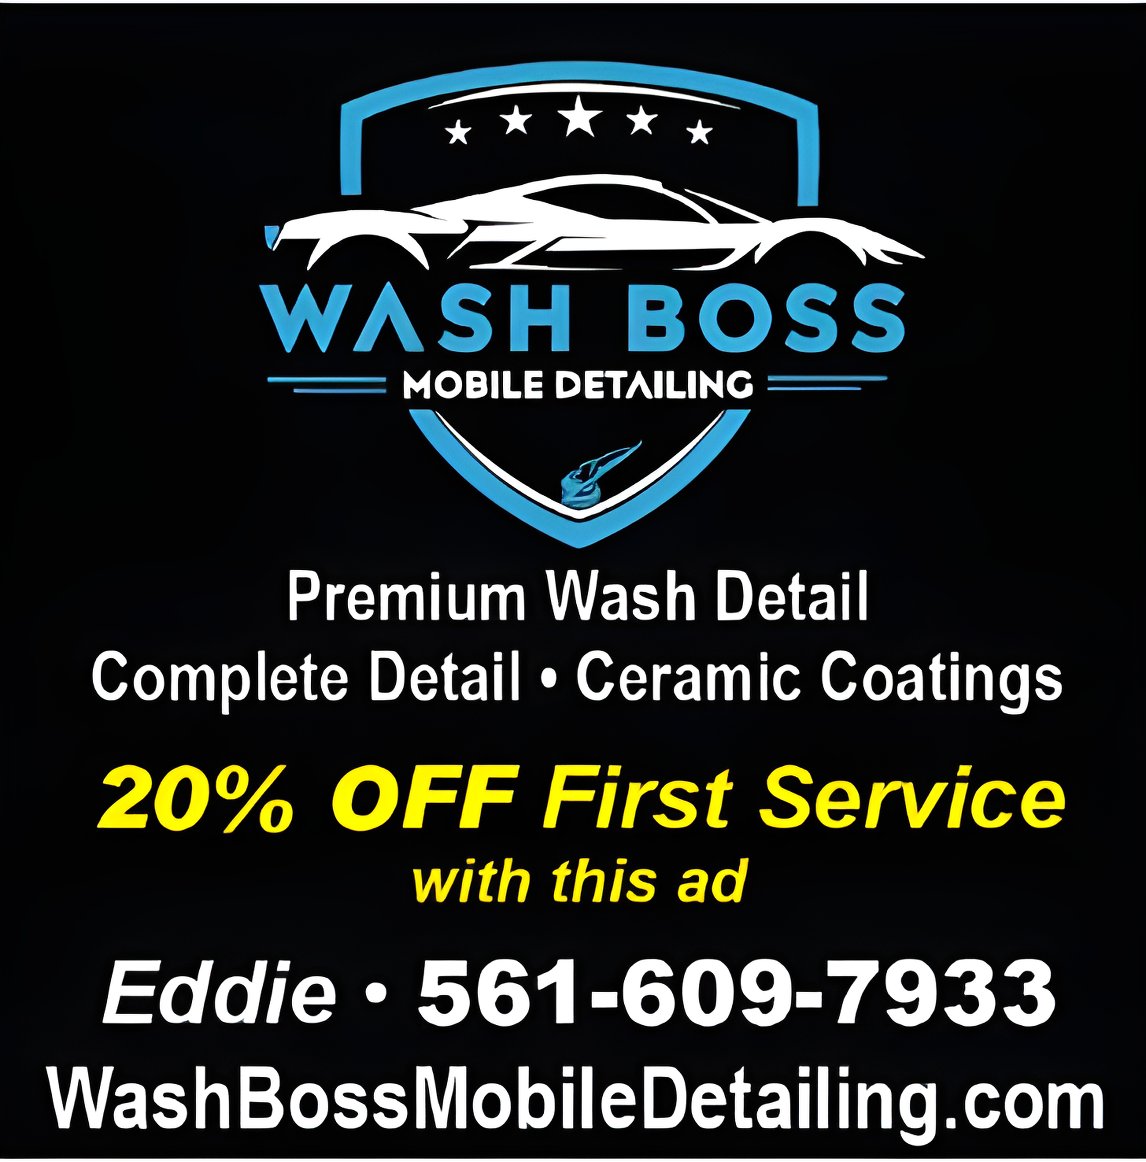 Wash Boss Mobile Detailing is offering 20% OFF your first service with this OPG ad!! Be sure to check them out!! 🚗 #mobiledetailing #detailingservice #ceramiccoatings #palmbeachcounty #floridabusiness #orangepeeladvertiser